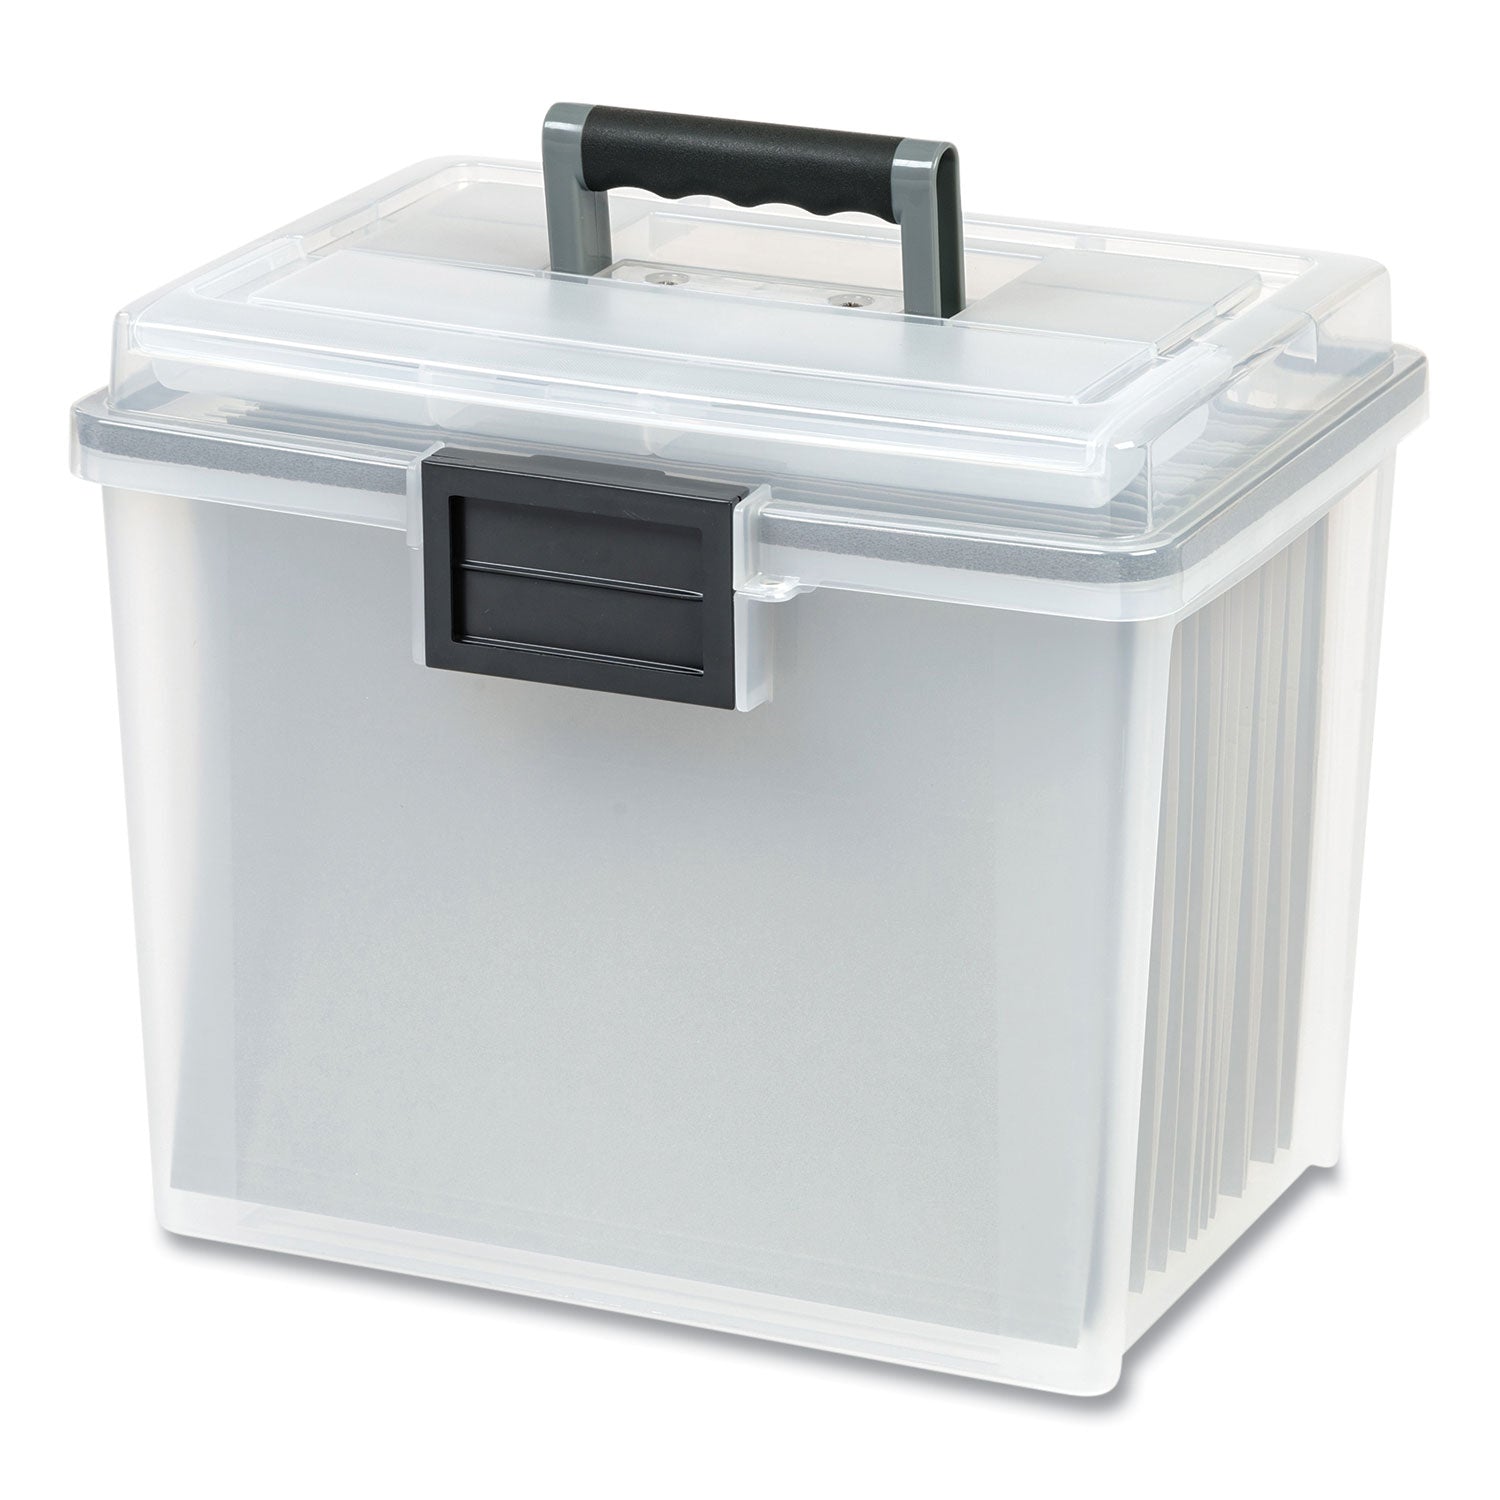 weathertight-portable-file-box-letter-files-137-x-104-x-118-clear-gray-accents_irs110351 - 1